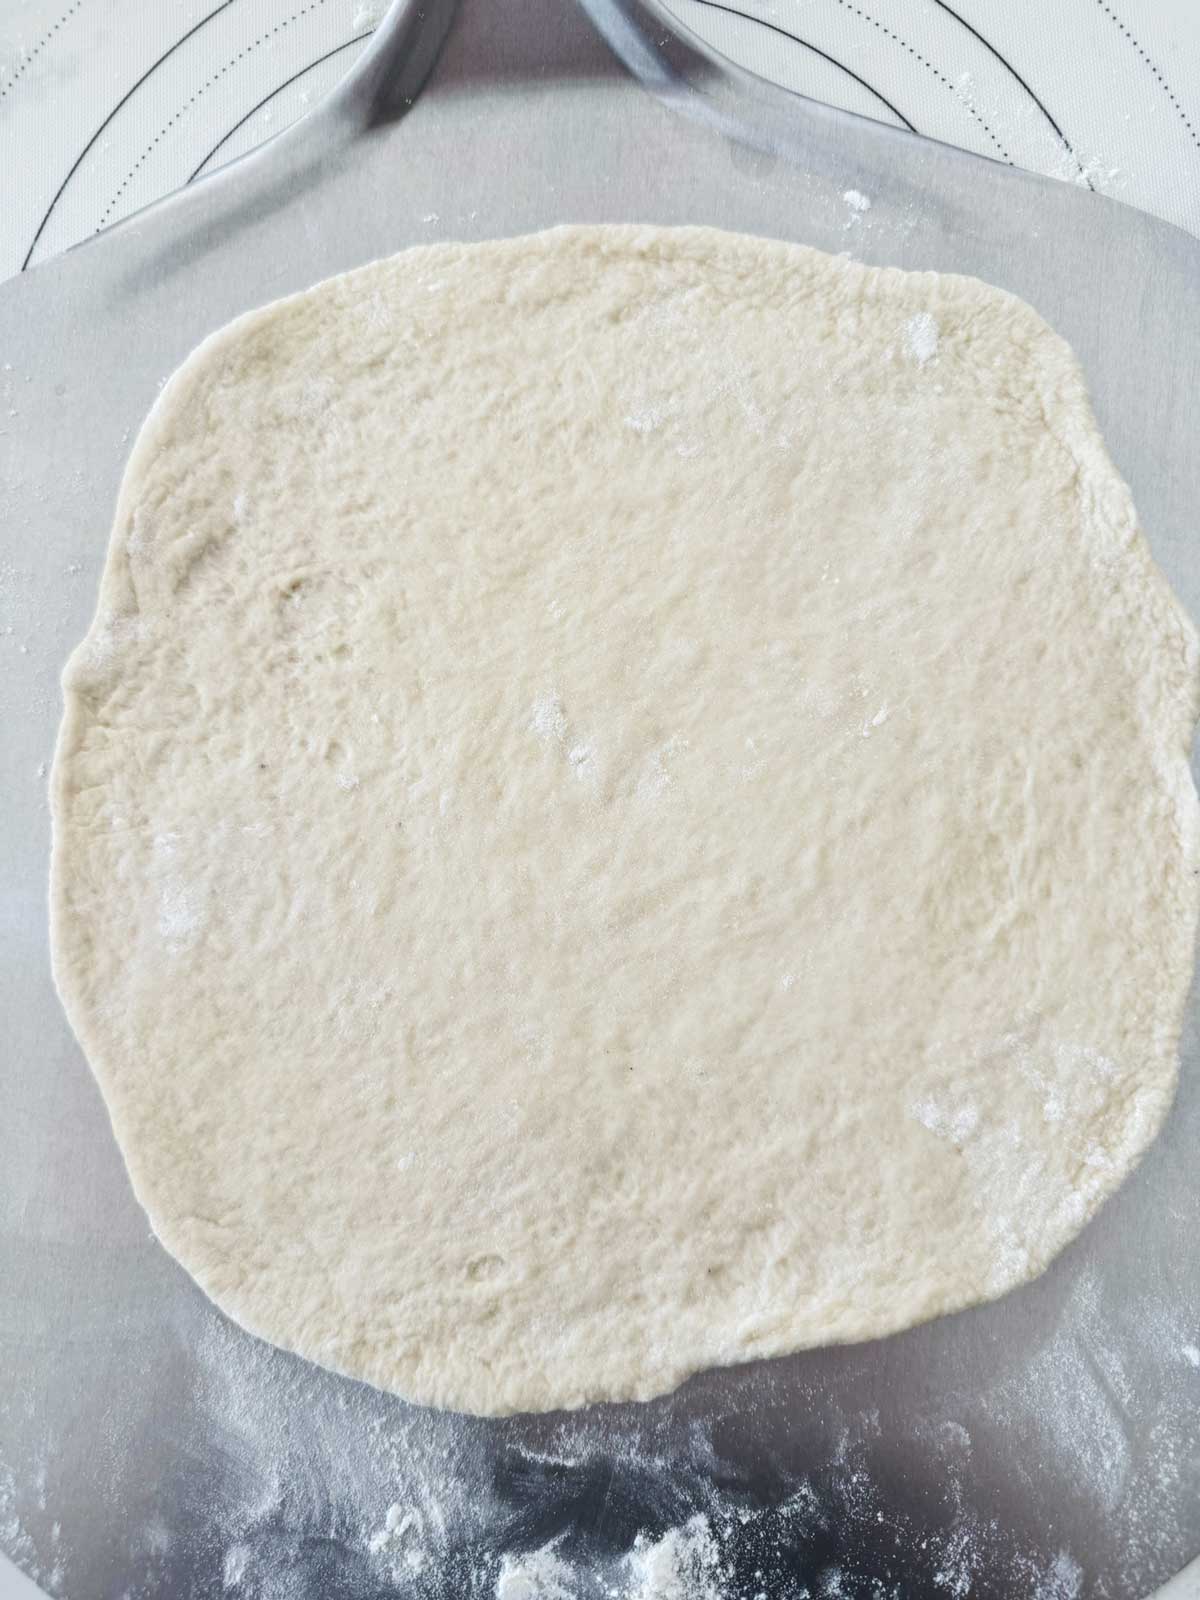 A rolled out pizza crust on a lightly floured pizza peel.